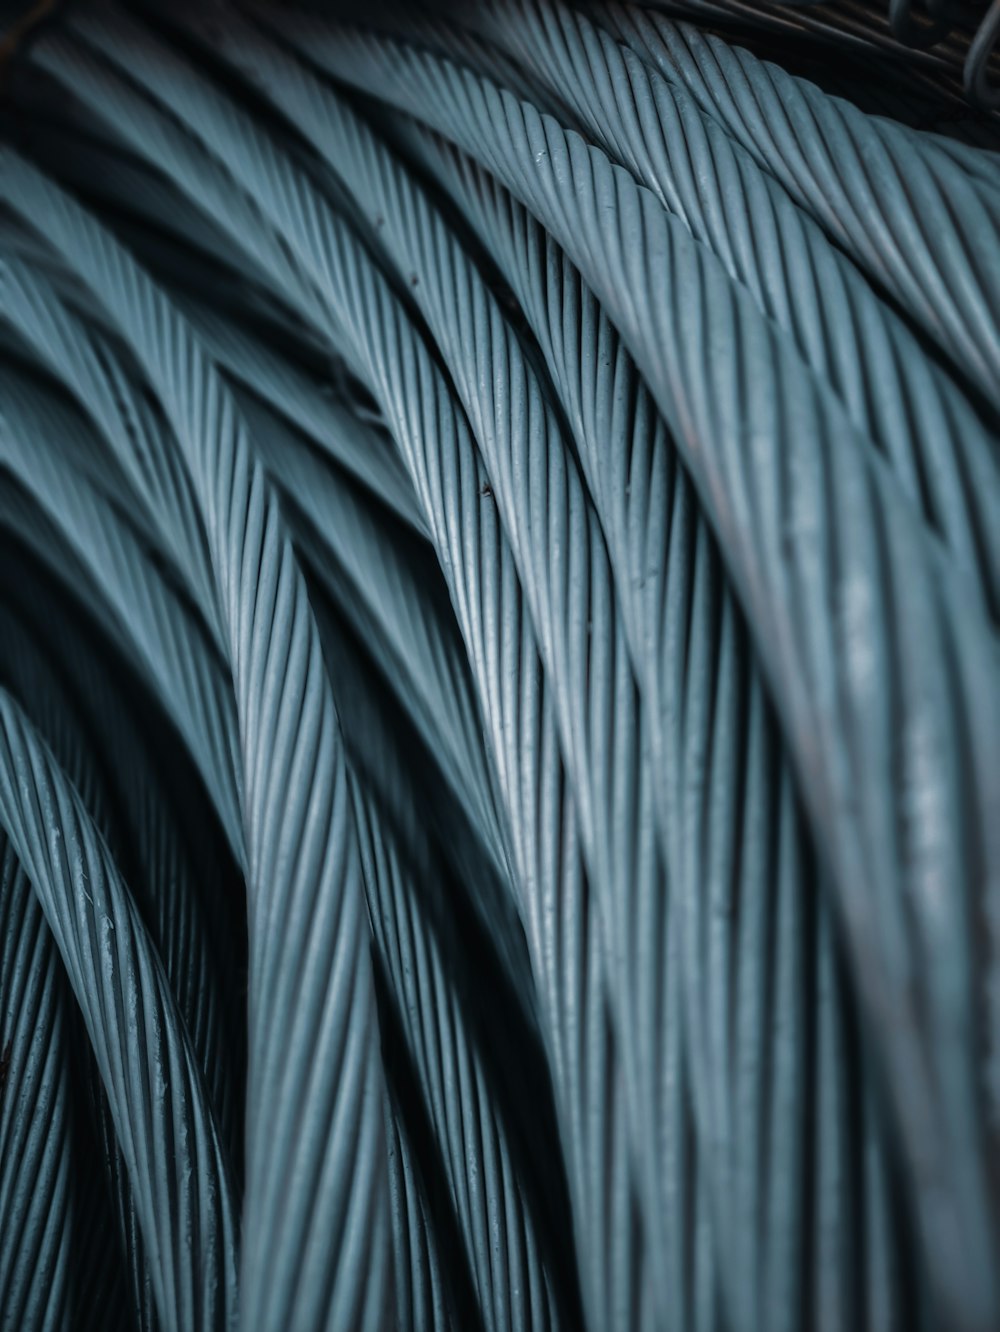 a close up of a coil of wires